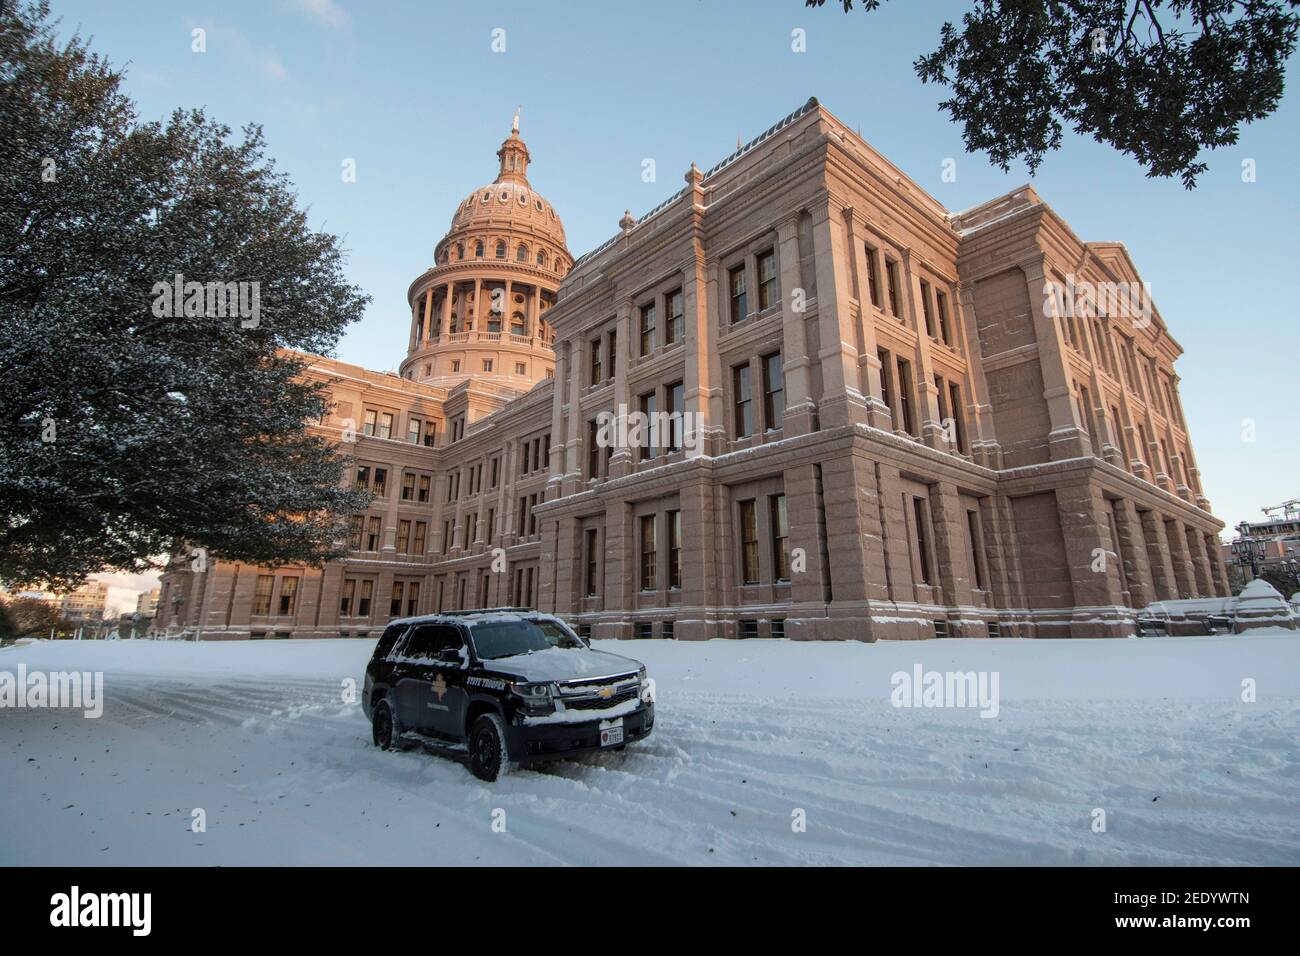 Austin, Texas USA Feb 15, 2021: A Dept. of Public Safety vehicle guards the east entrance of the Texas Capitol Monday morning after an overnight winter storm blew into central Texas dropping 6-7 inches of snow. The accompanying frigid weather wreaked havoc on the state's electricity grid, causing massive power outages to millions of customers across the state. Credit: Bob Daemmrich/Alamy Live News Stock Photo